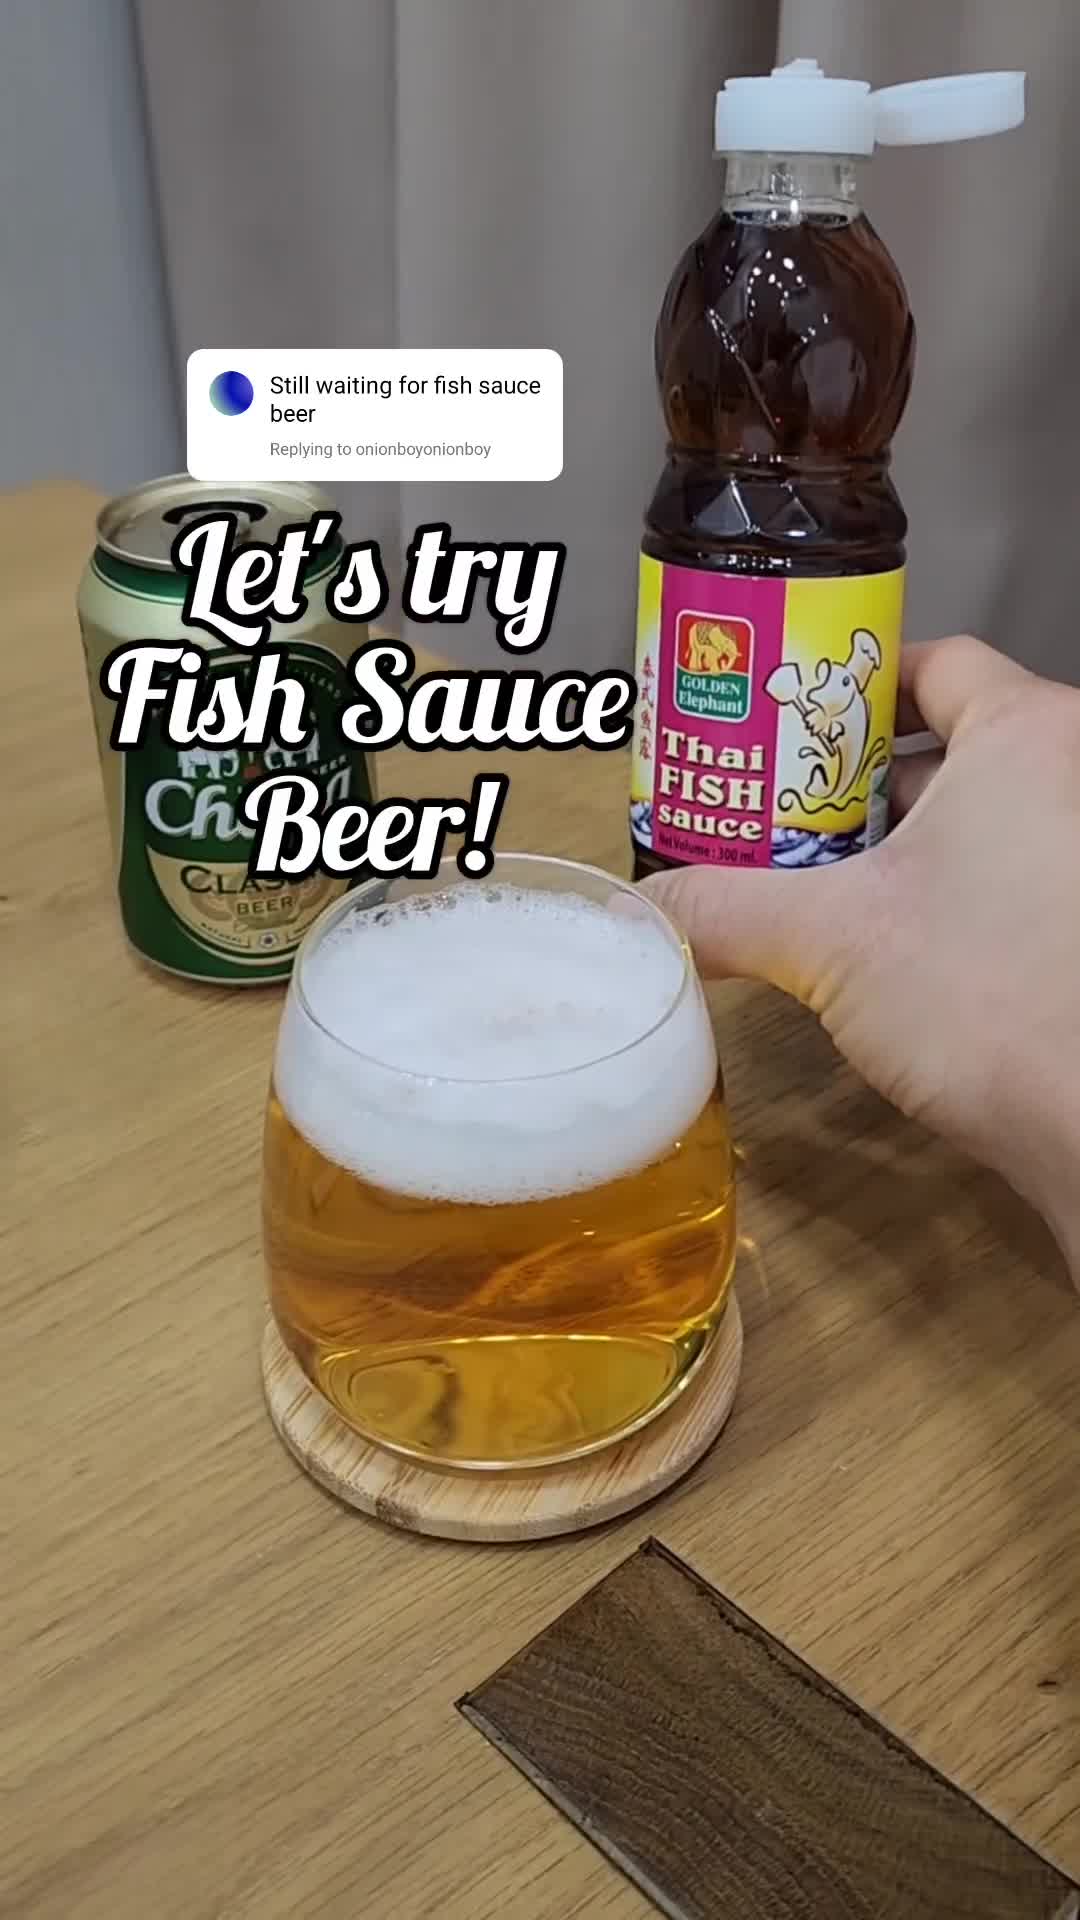 fish-sauce-beer-no-just-no-only-drink-if-you-are-of-legal-drinking-age-ah-foodmakescalhappy-beer-beerstagram-instagram-1713327061.mp4